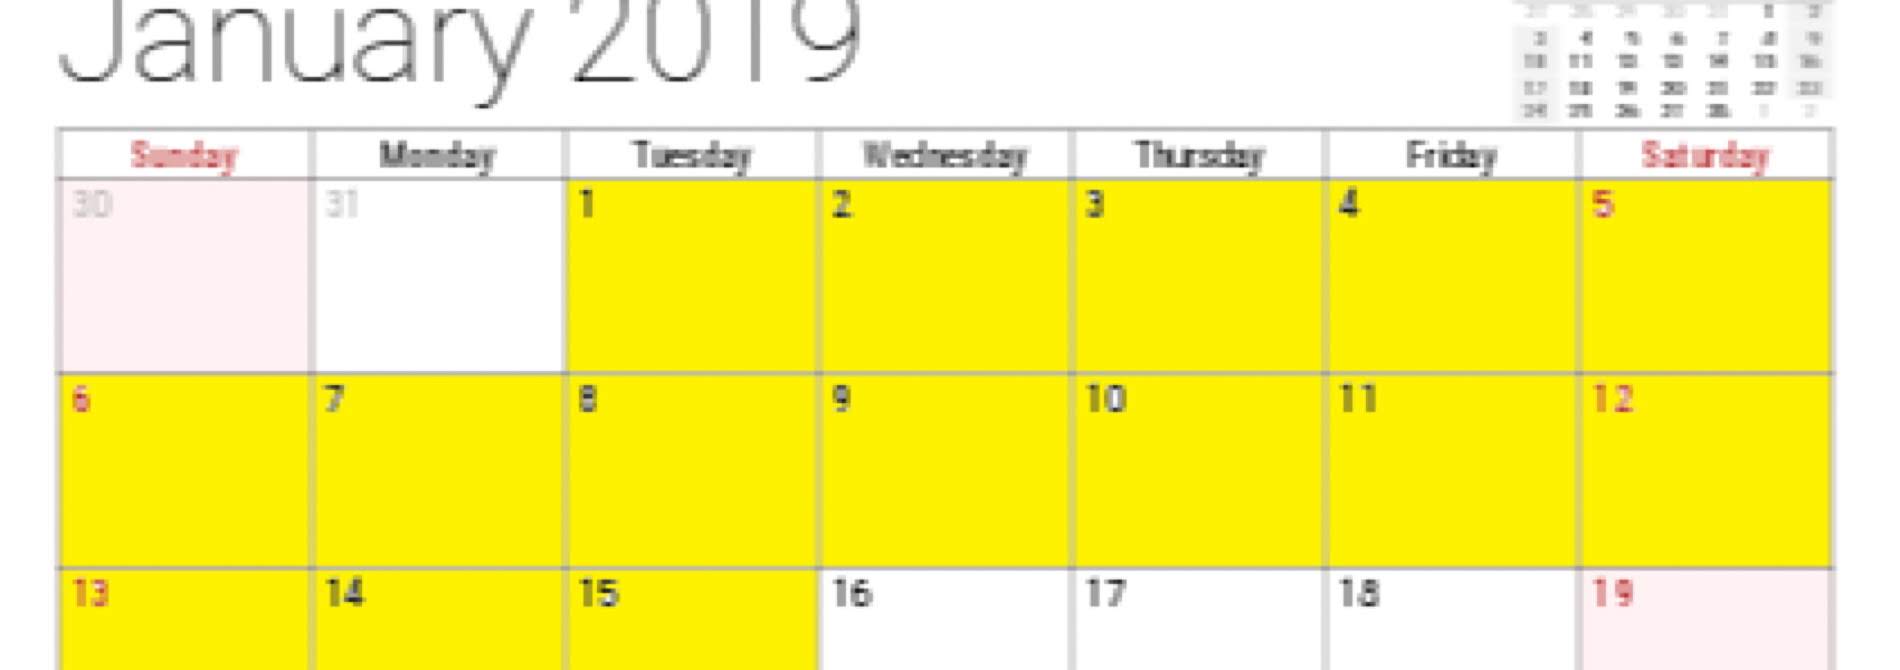 january 2019 calendar with 1st-15th highlighted in yellow